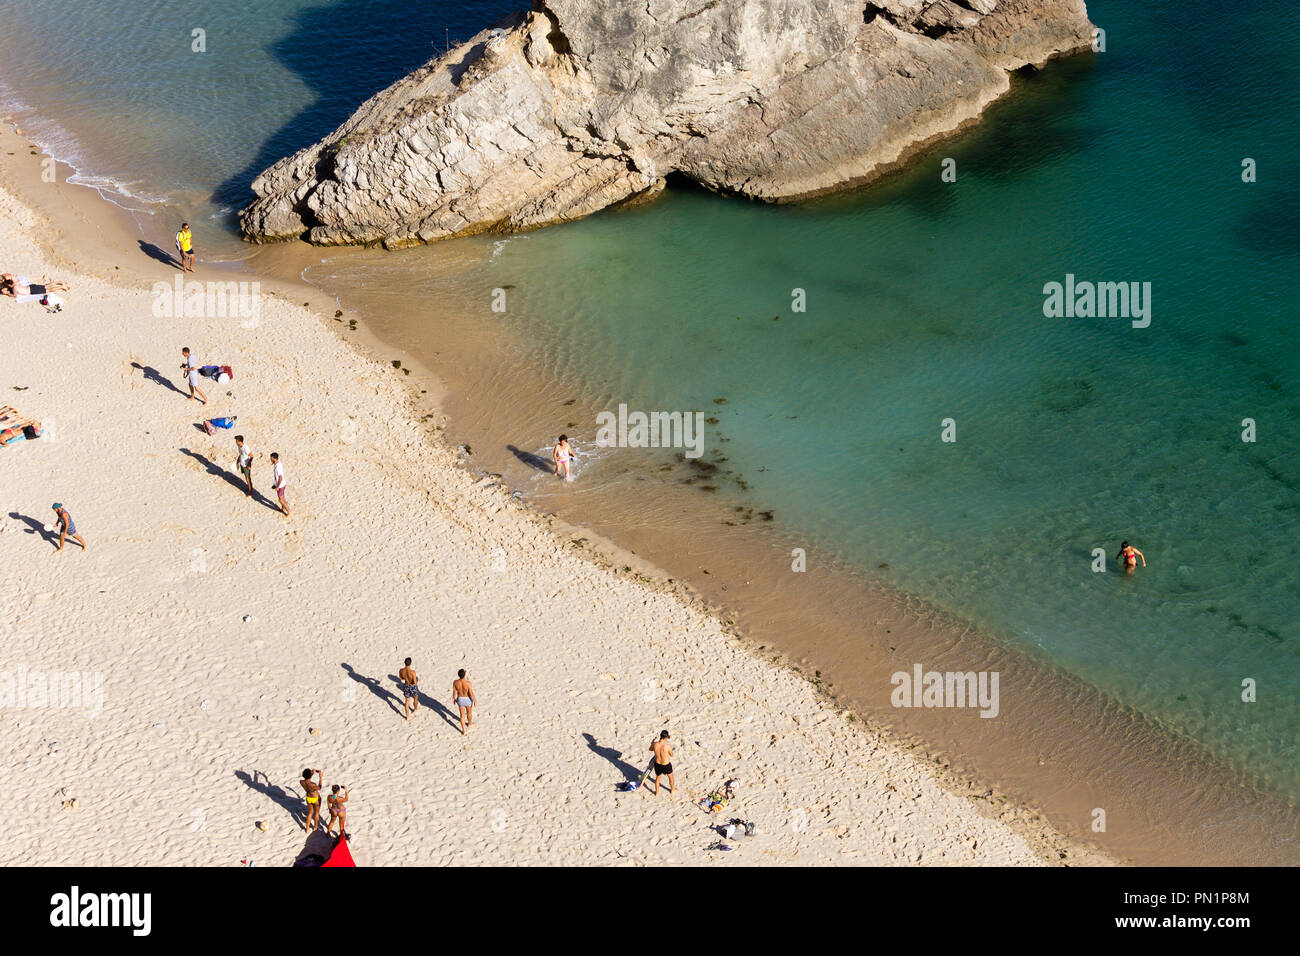 A top-view from several people on the beach with a big rock formation in the ocean. Stock Photo